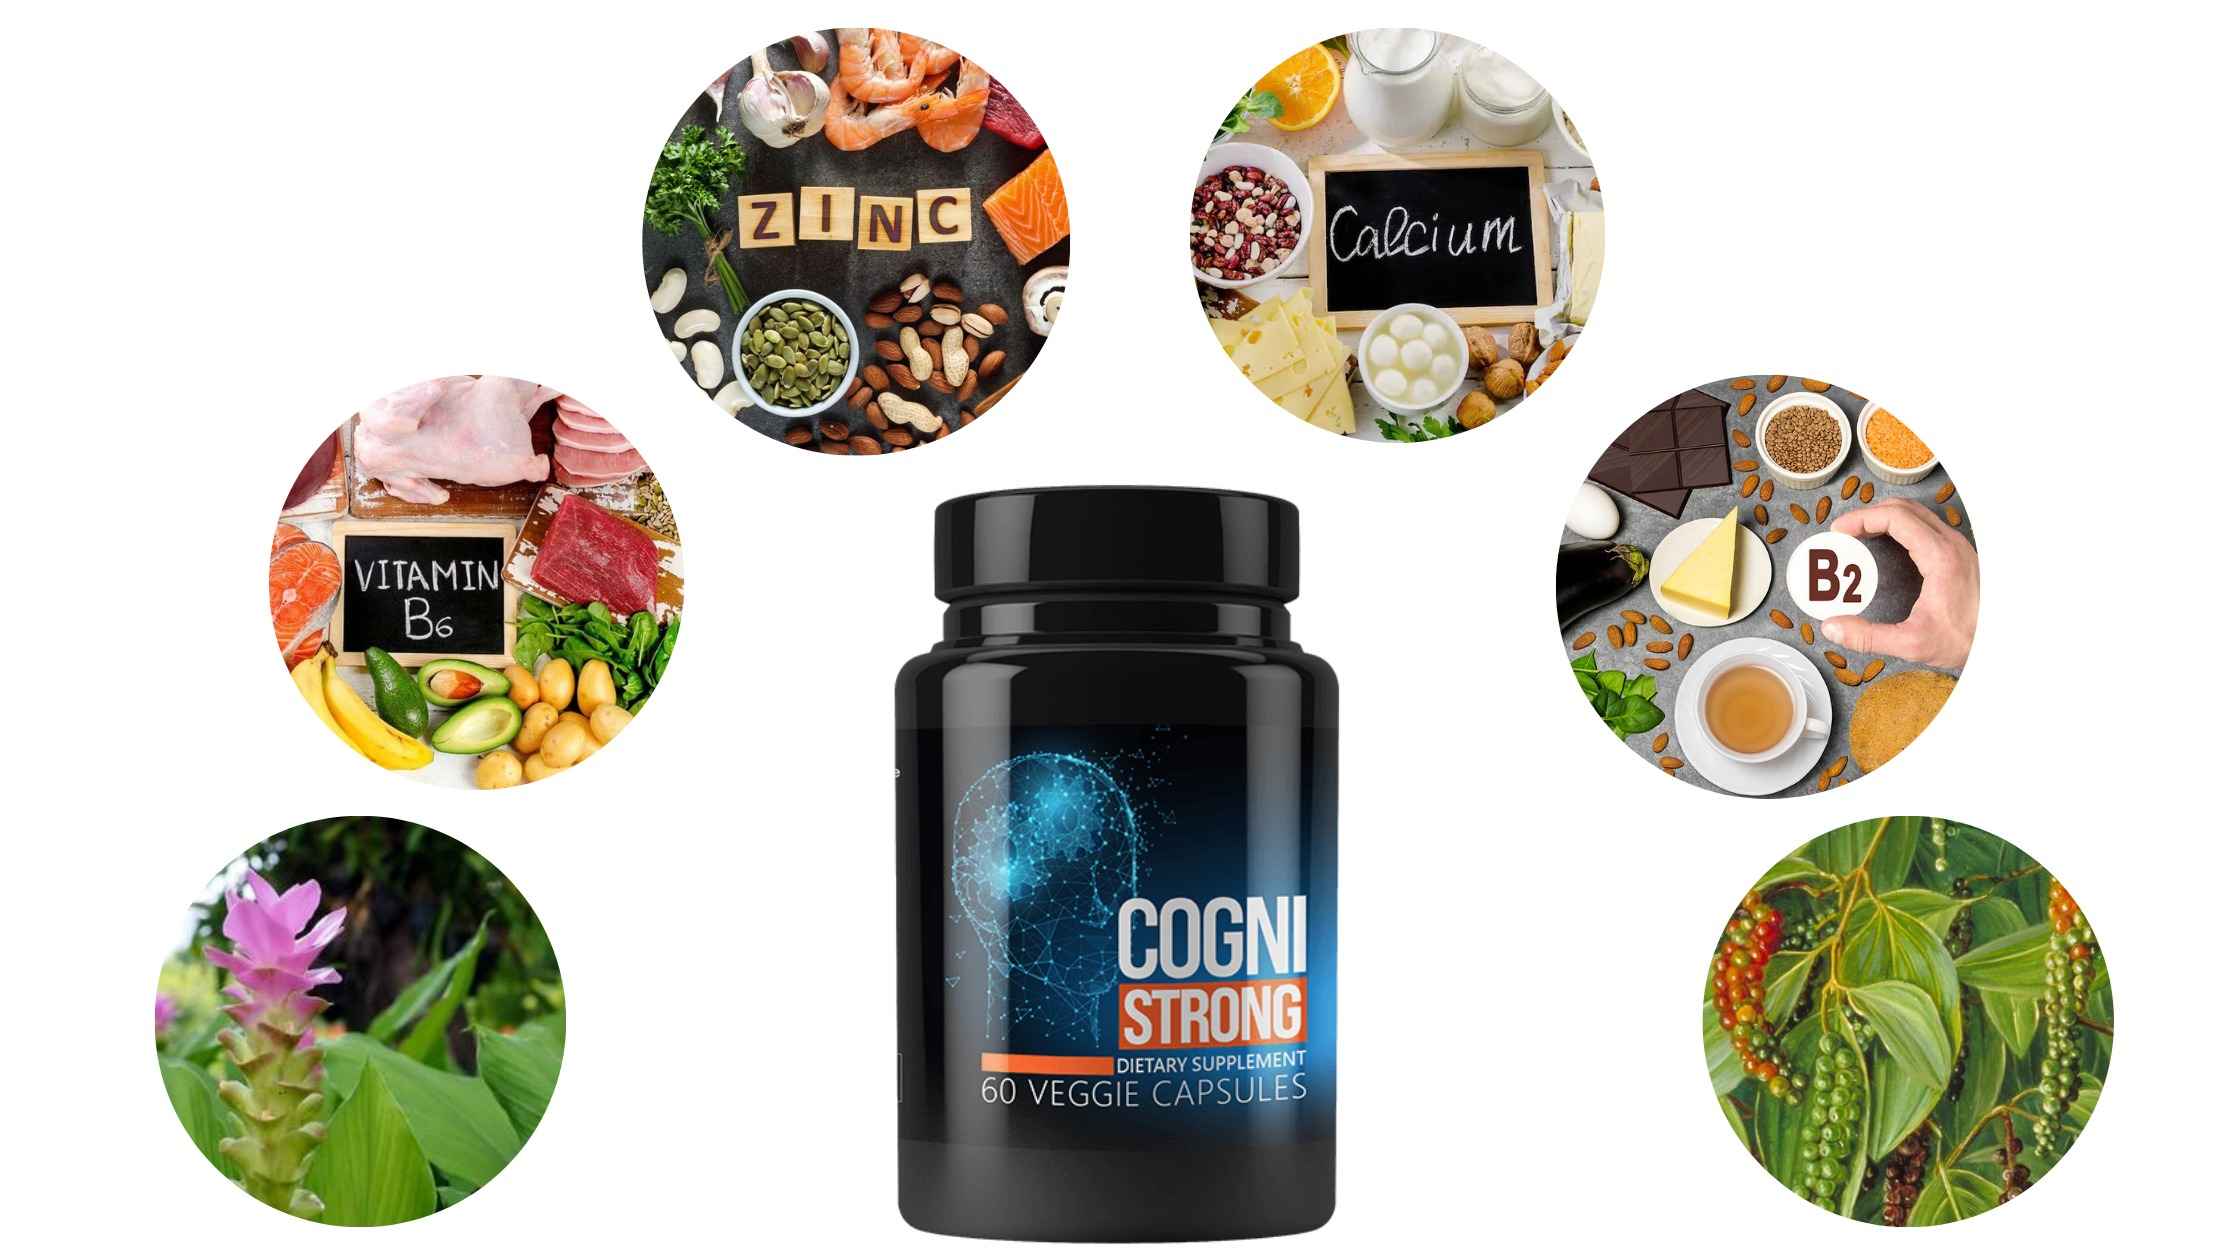 CogniStrong Ingredients